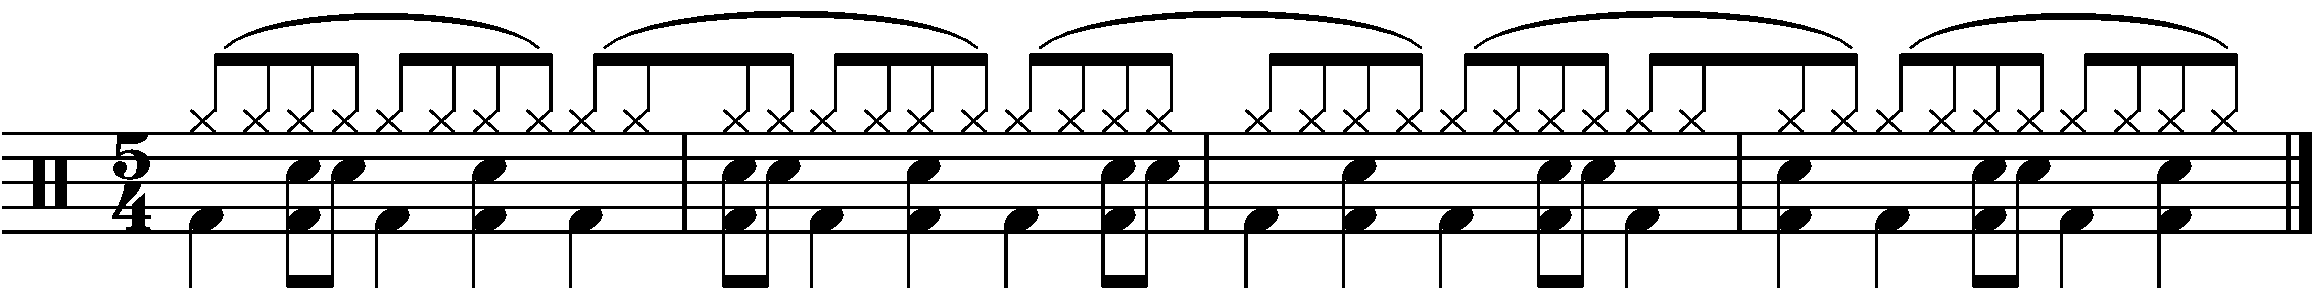 A four bar polymetered phrase